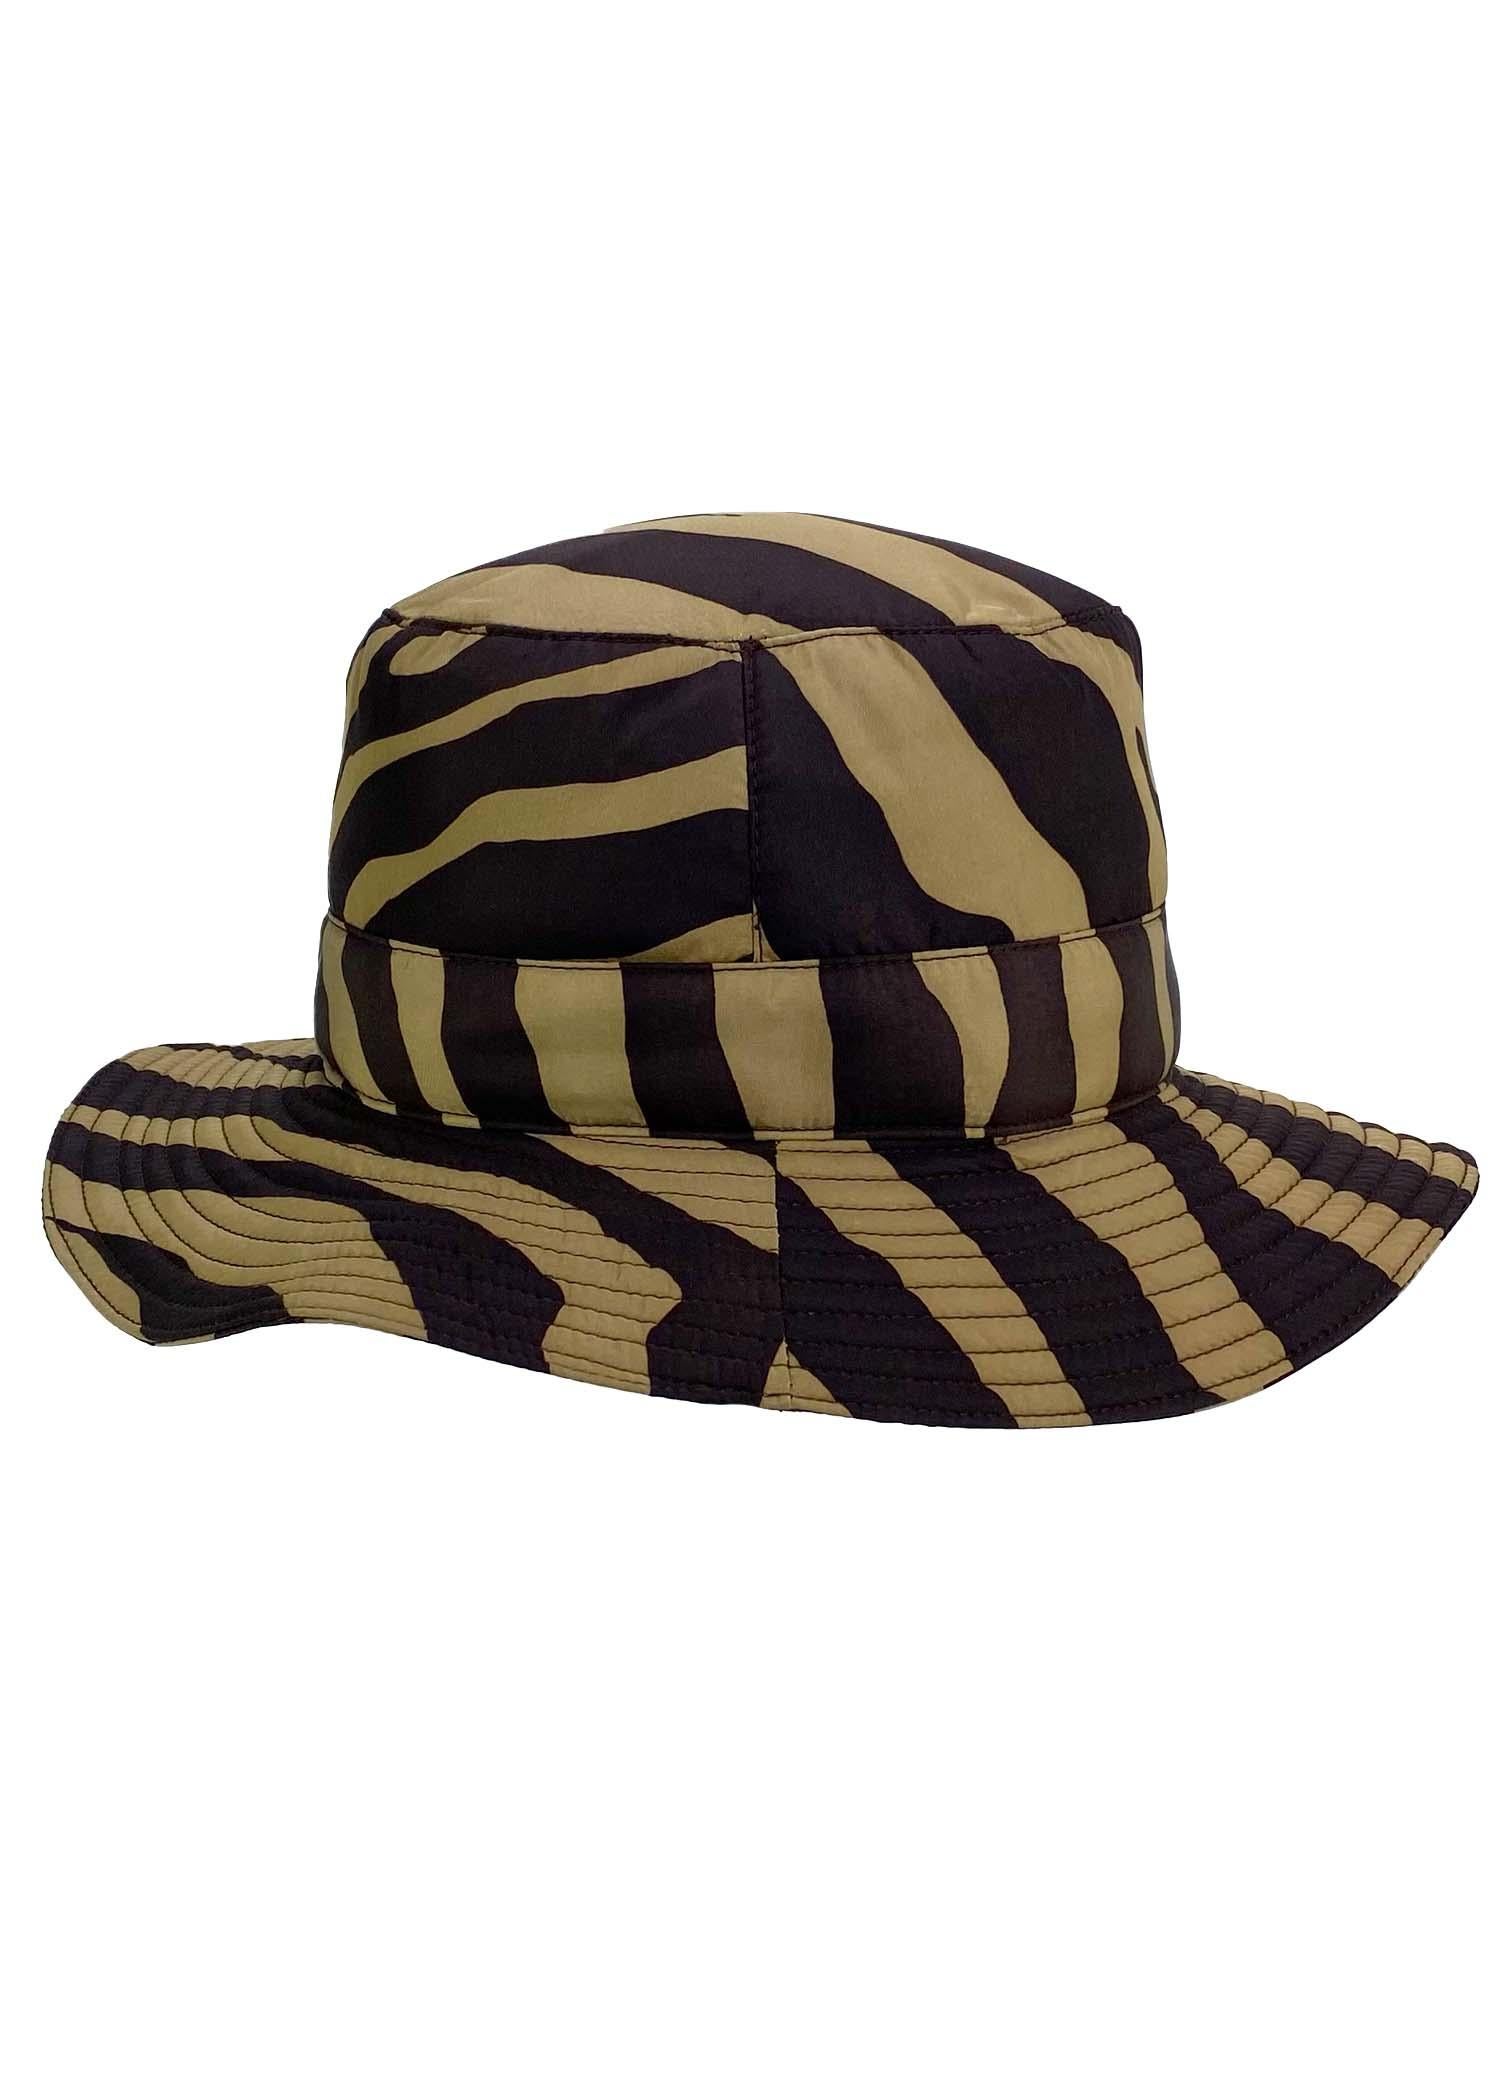 Presenting a vintage brown zebra print Dolce and Gabbana bucket hat. From the Fall/Winter 1996 collection, this classic bucket hat is outfitted in brown and beige zebra print nylon. From the heyday of Dolce and Gabbana, this hat is the perfect early